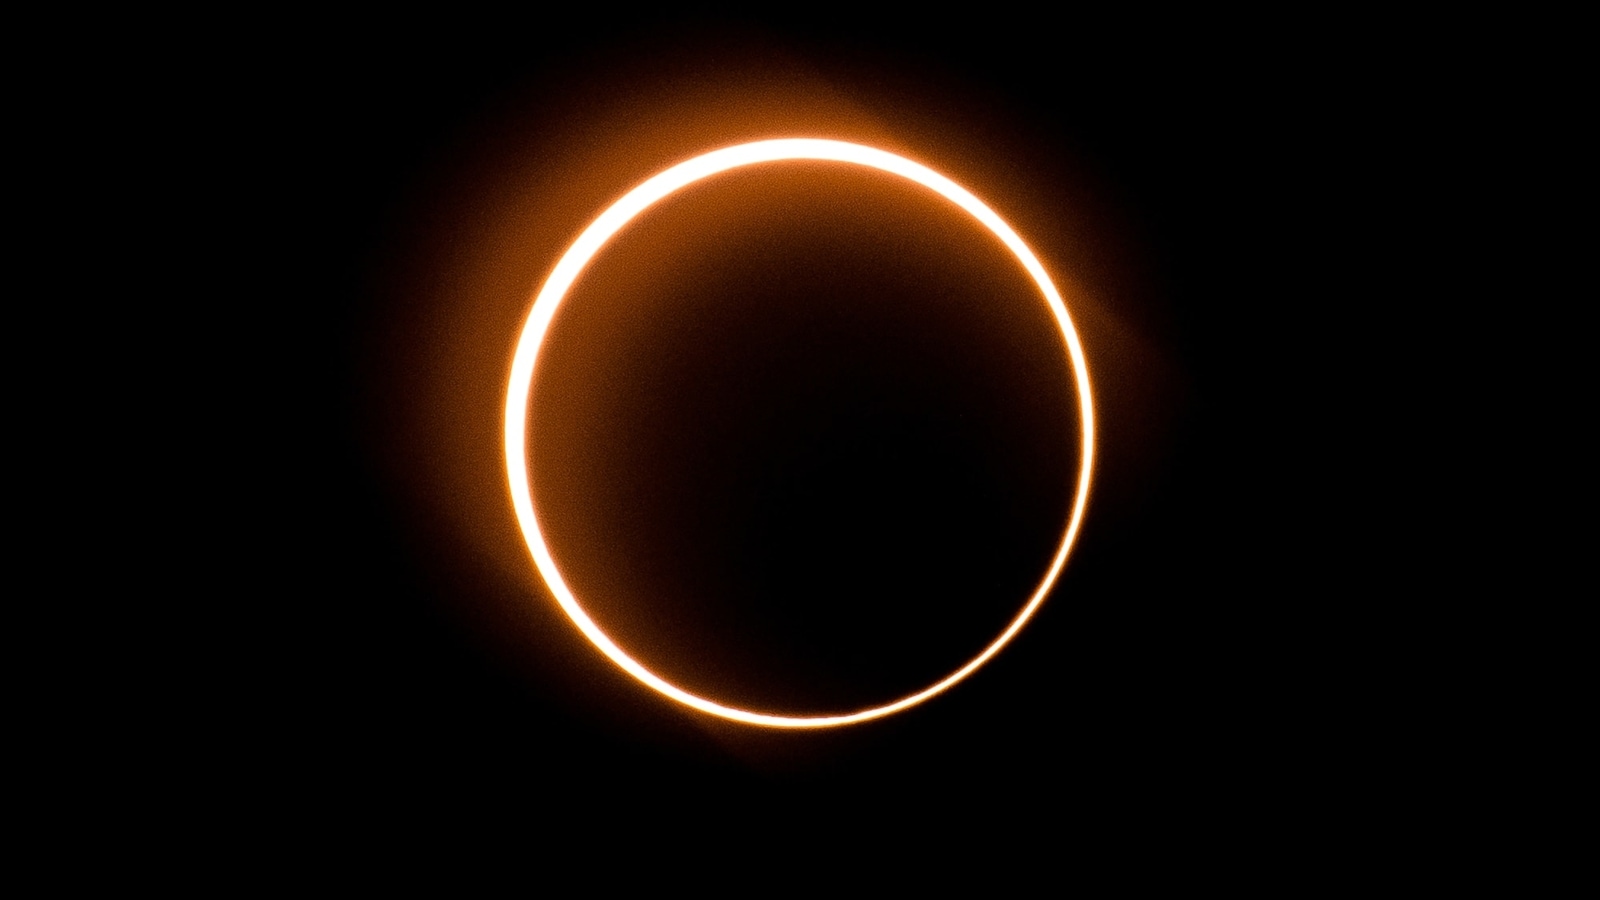 'Ring of fire' around the Moon during annular solar eclipse Explained